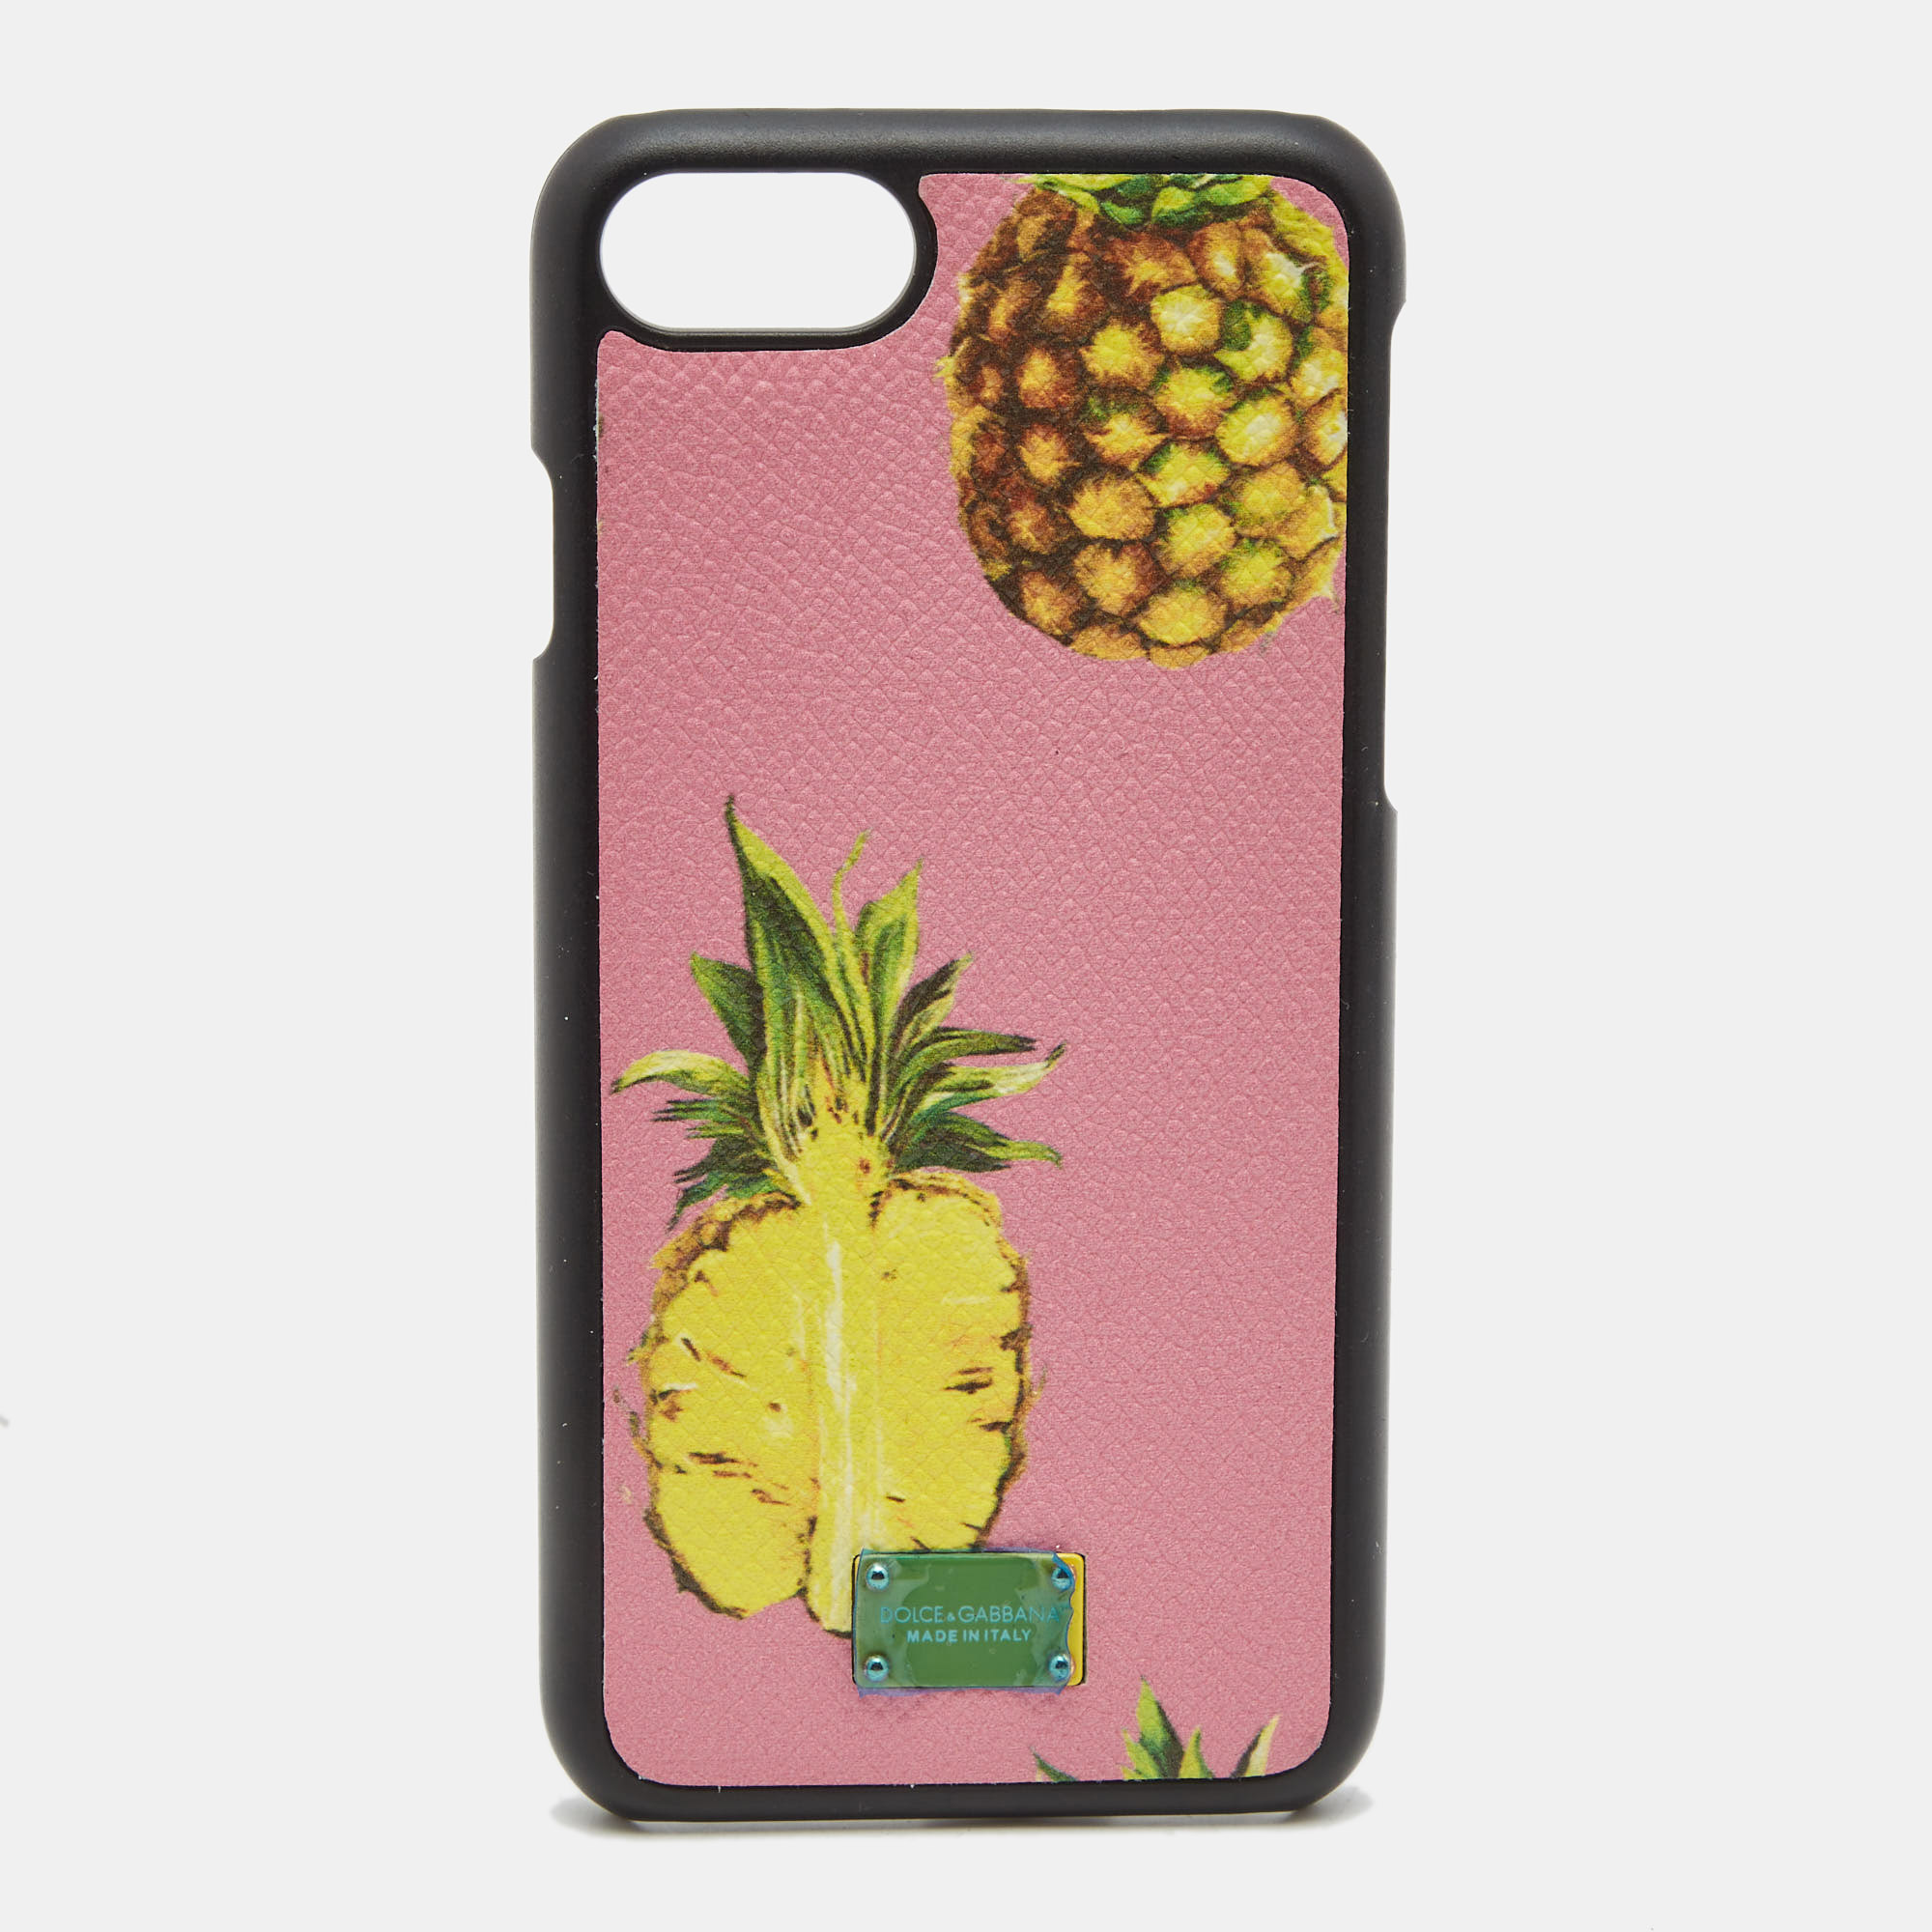 Dolce & Gabbana Pink/Black Pineapple Print Leather Phone Cover